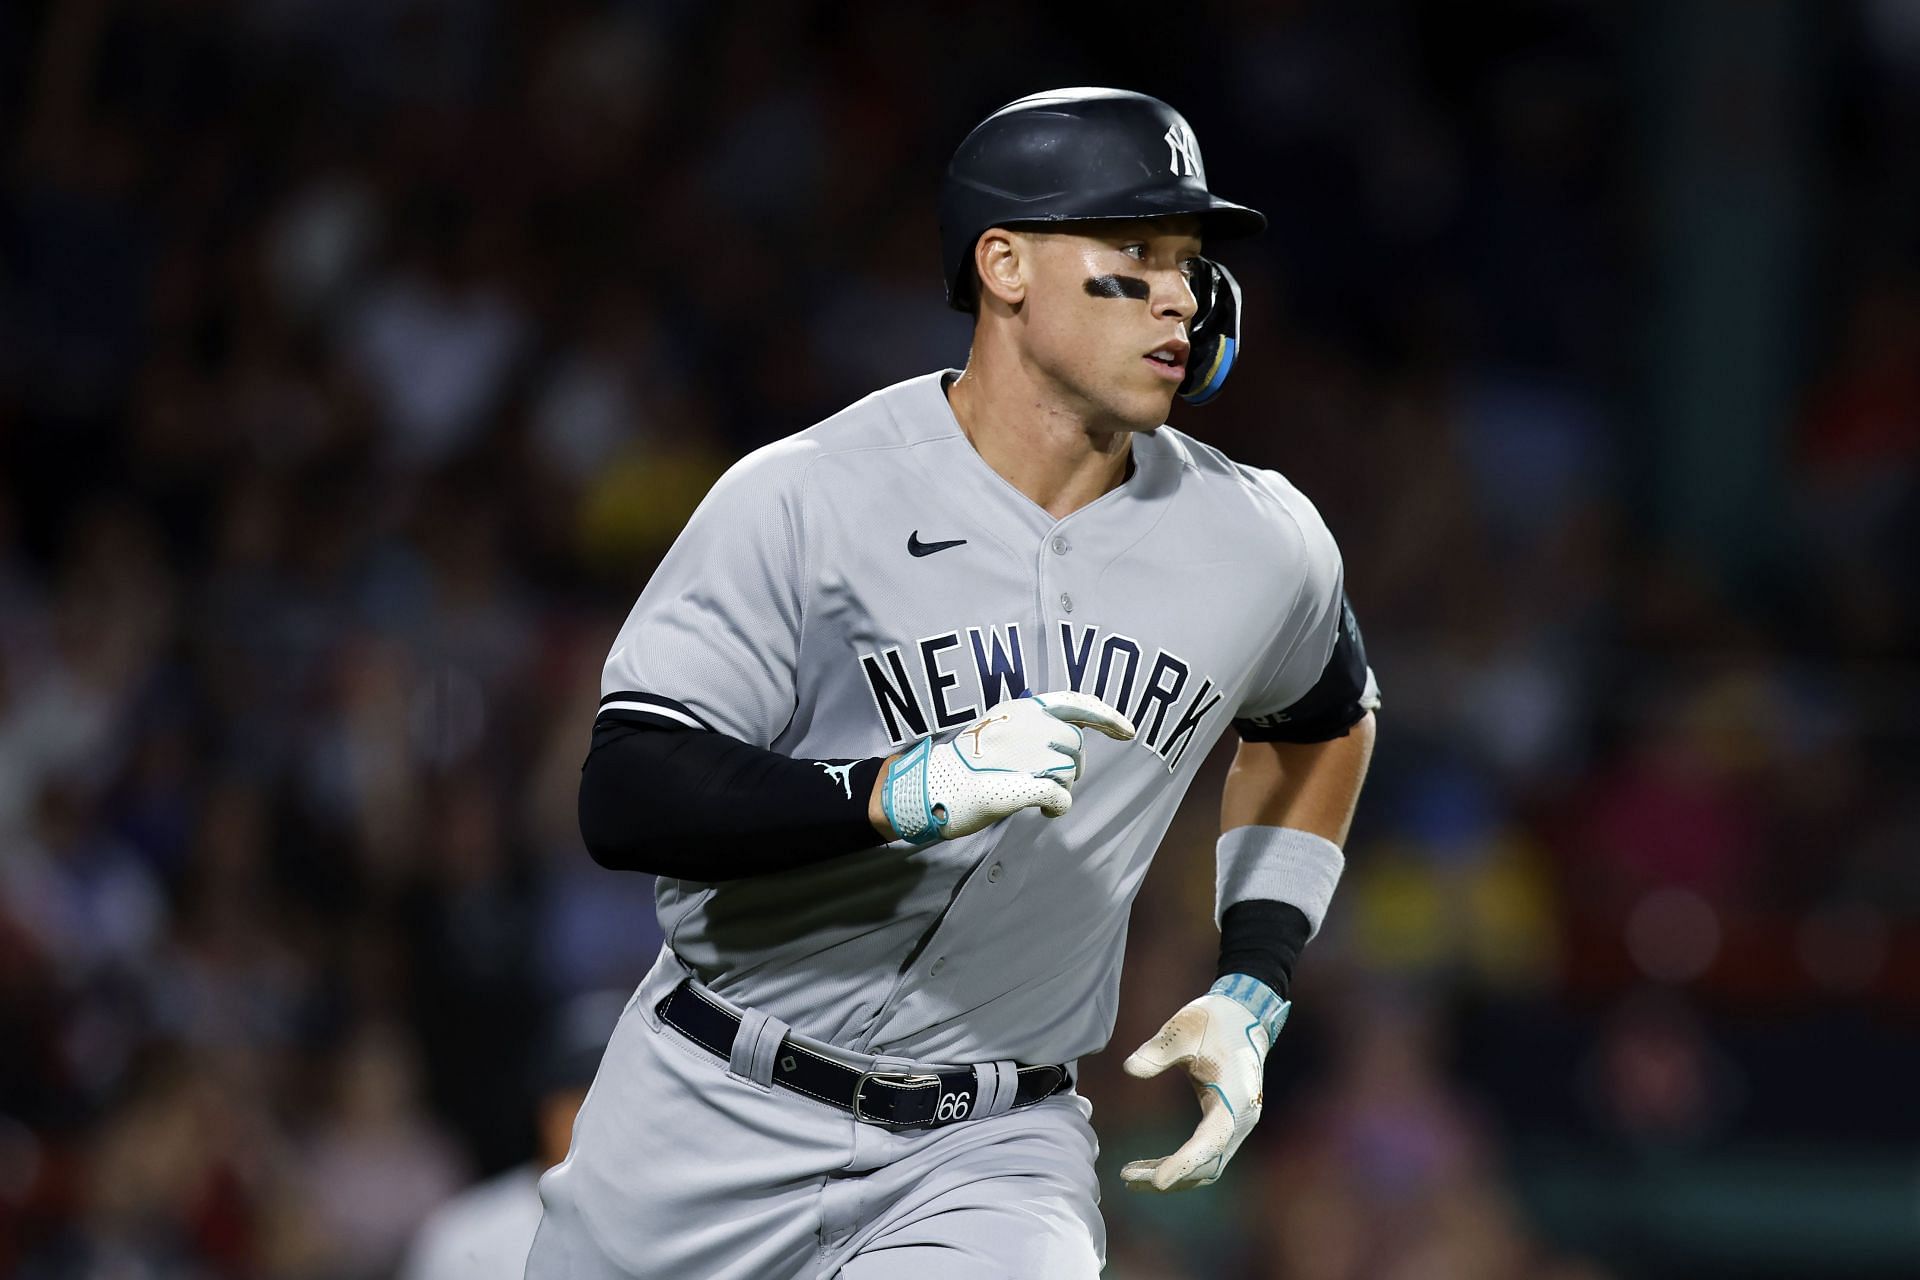 The Yankees secured their victory tonight at Fenway Park with a two run home run by Aaron Judge in the ninth inning.